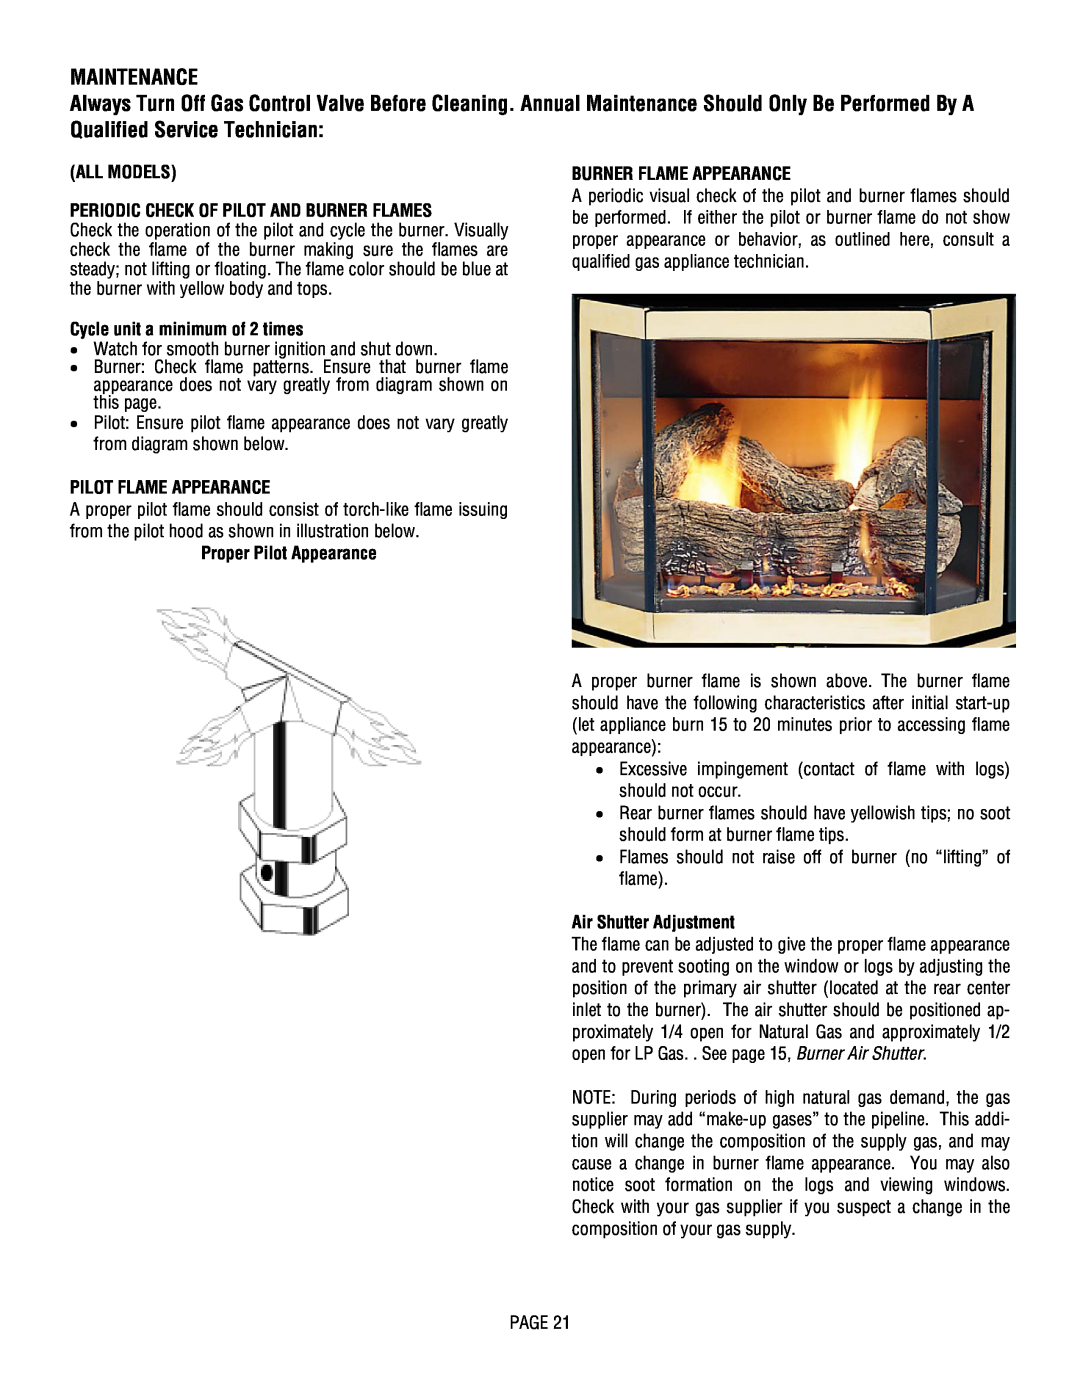 Lennox Hearth L20 BF-2 Maintenance, All Models, Periodic Check Of Pilot And Burner Flames, Cycle unit a minimum of 2 times 